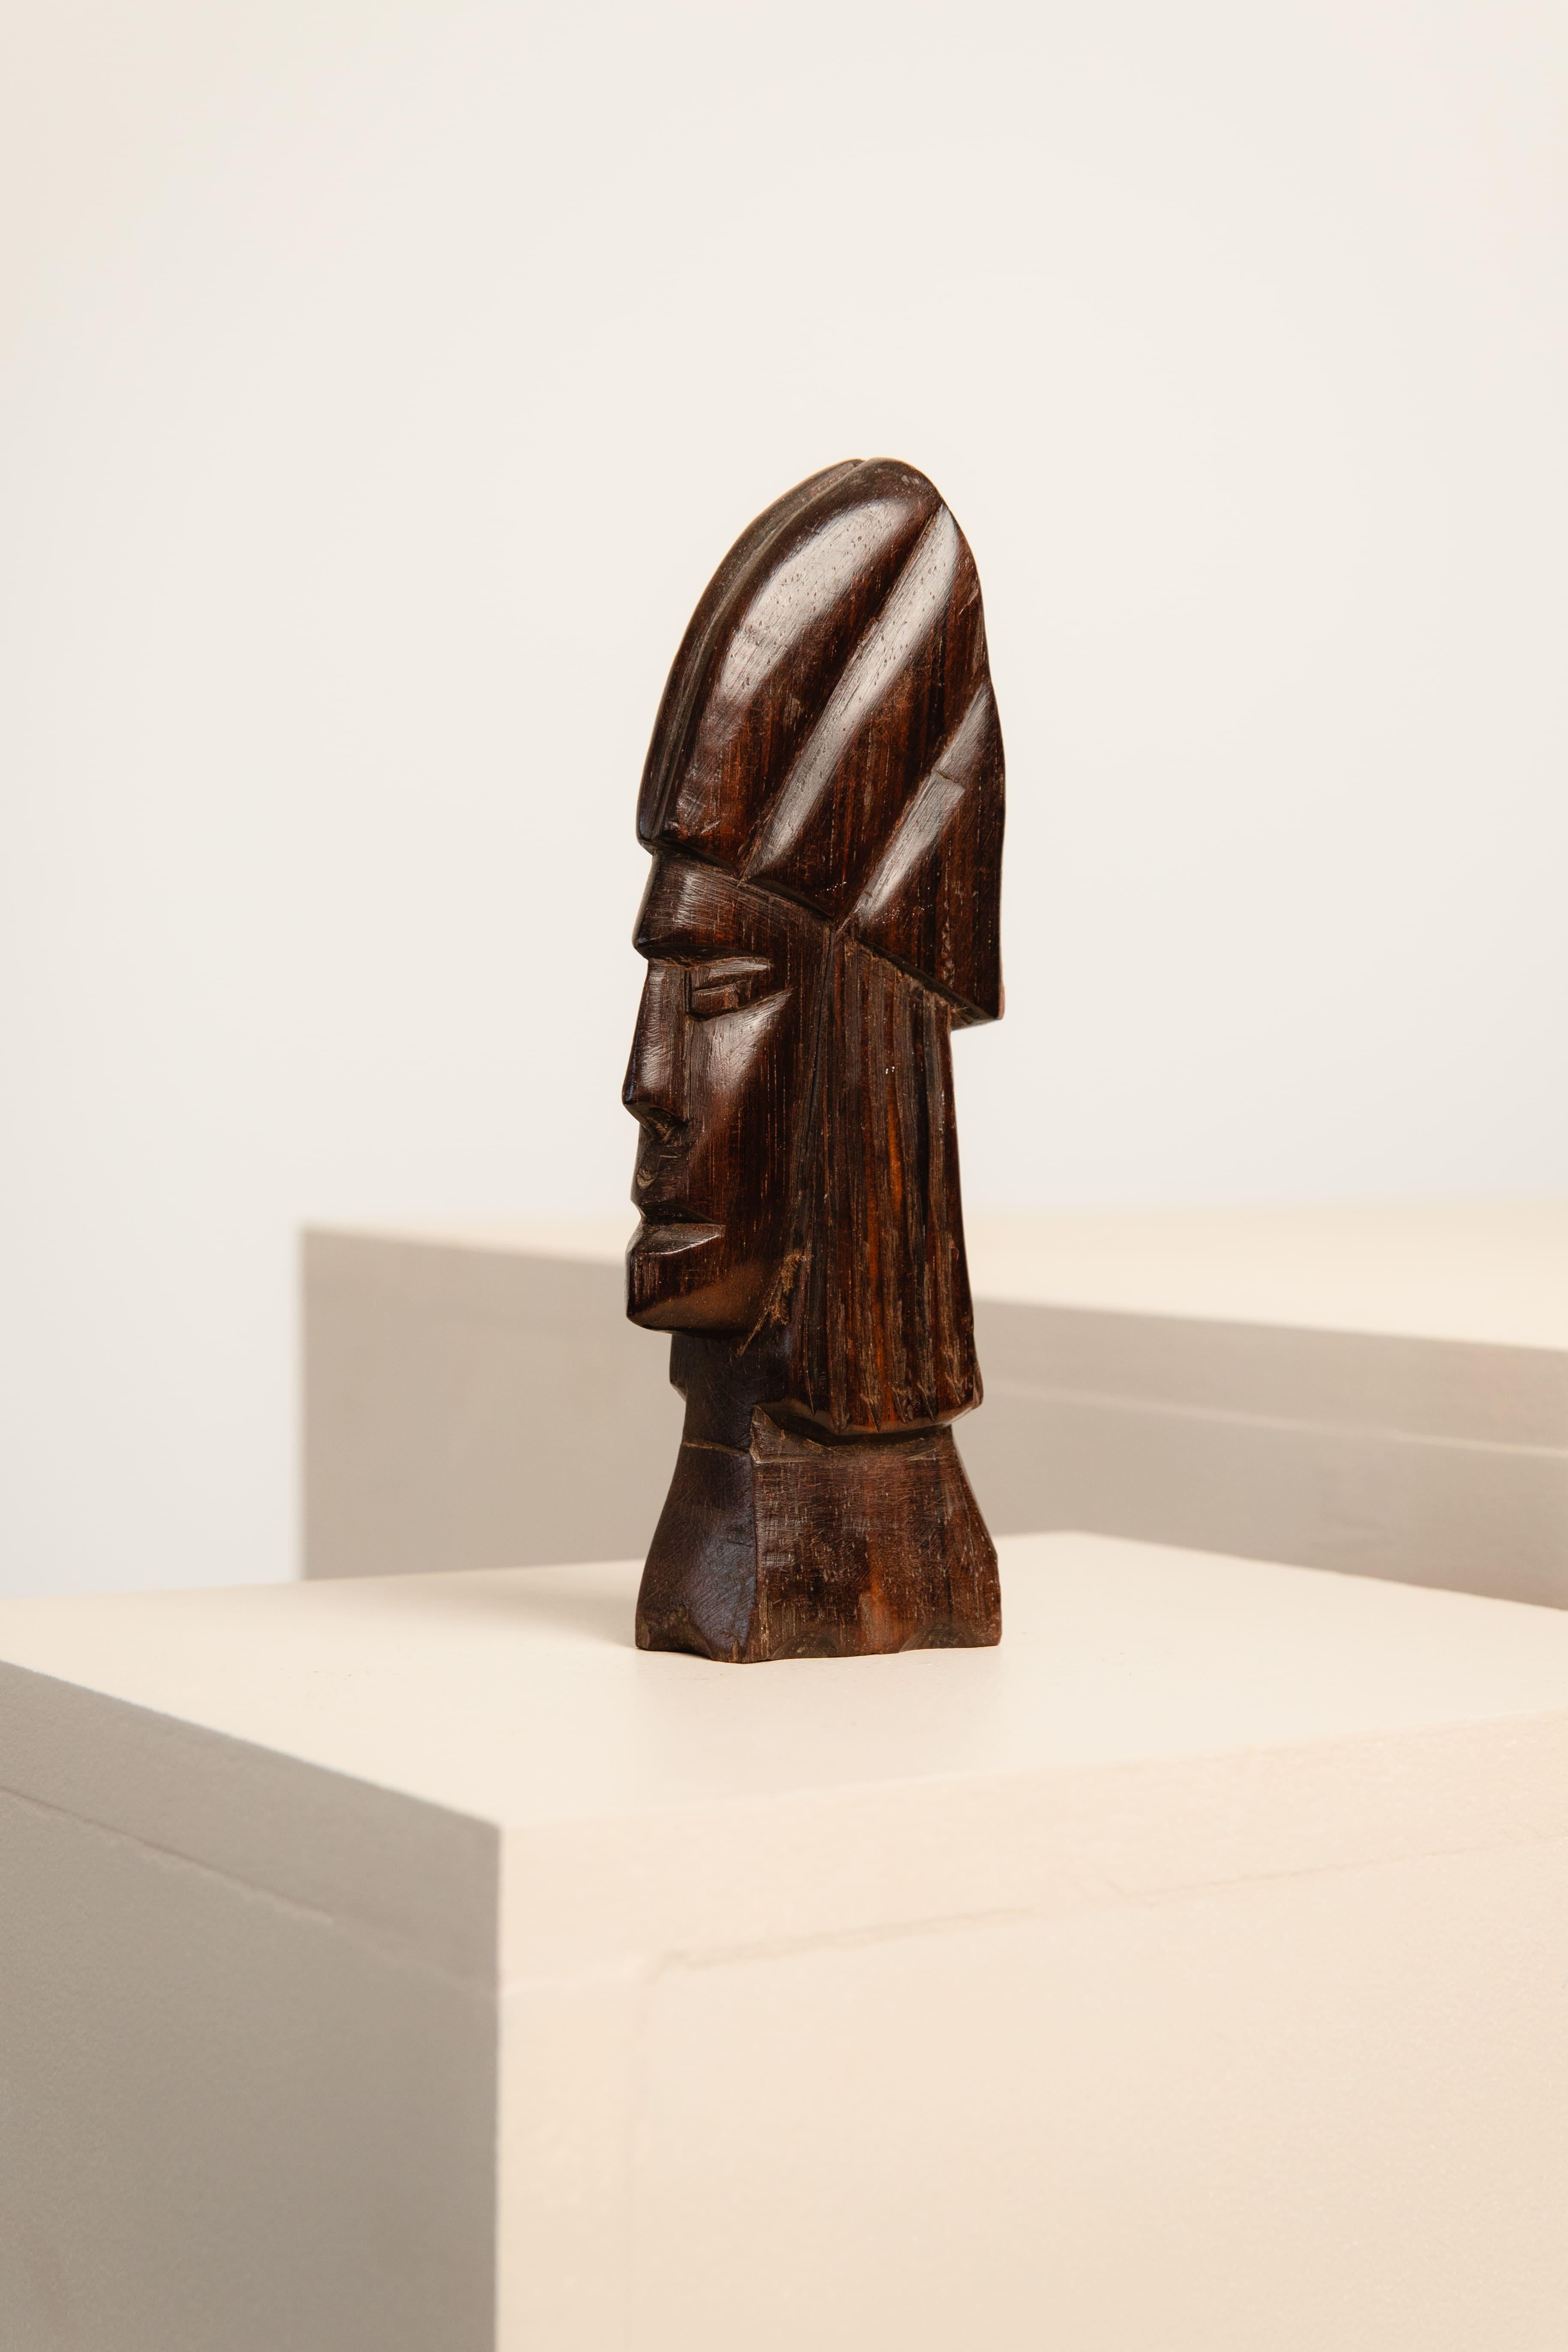 Small sculpture of an indigenous face carved in Brazilian rosewood of unknown authorship.